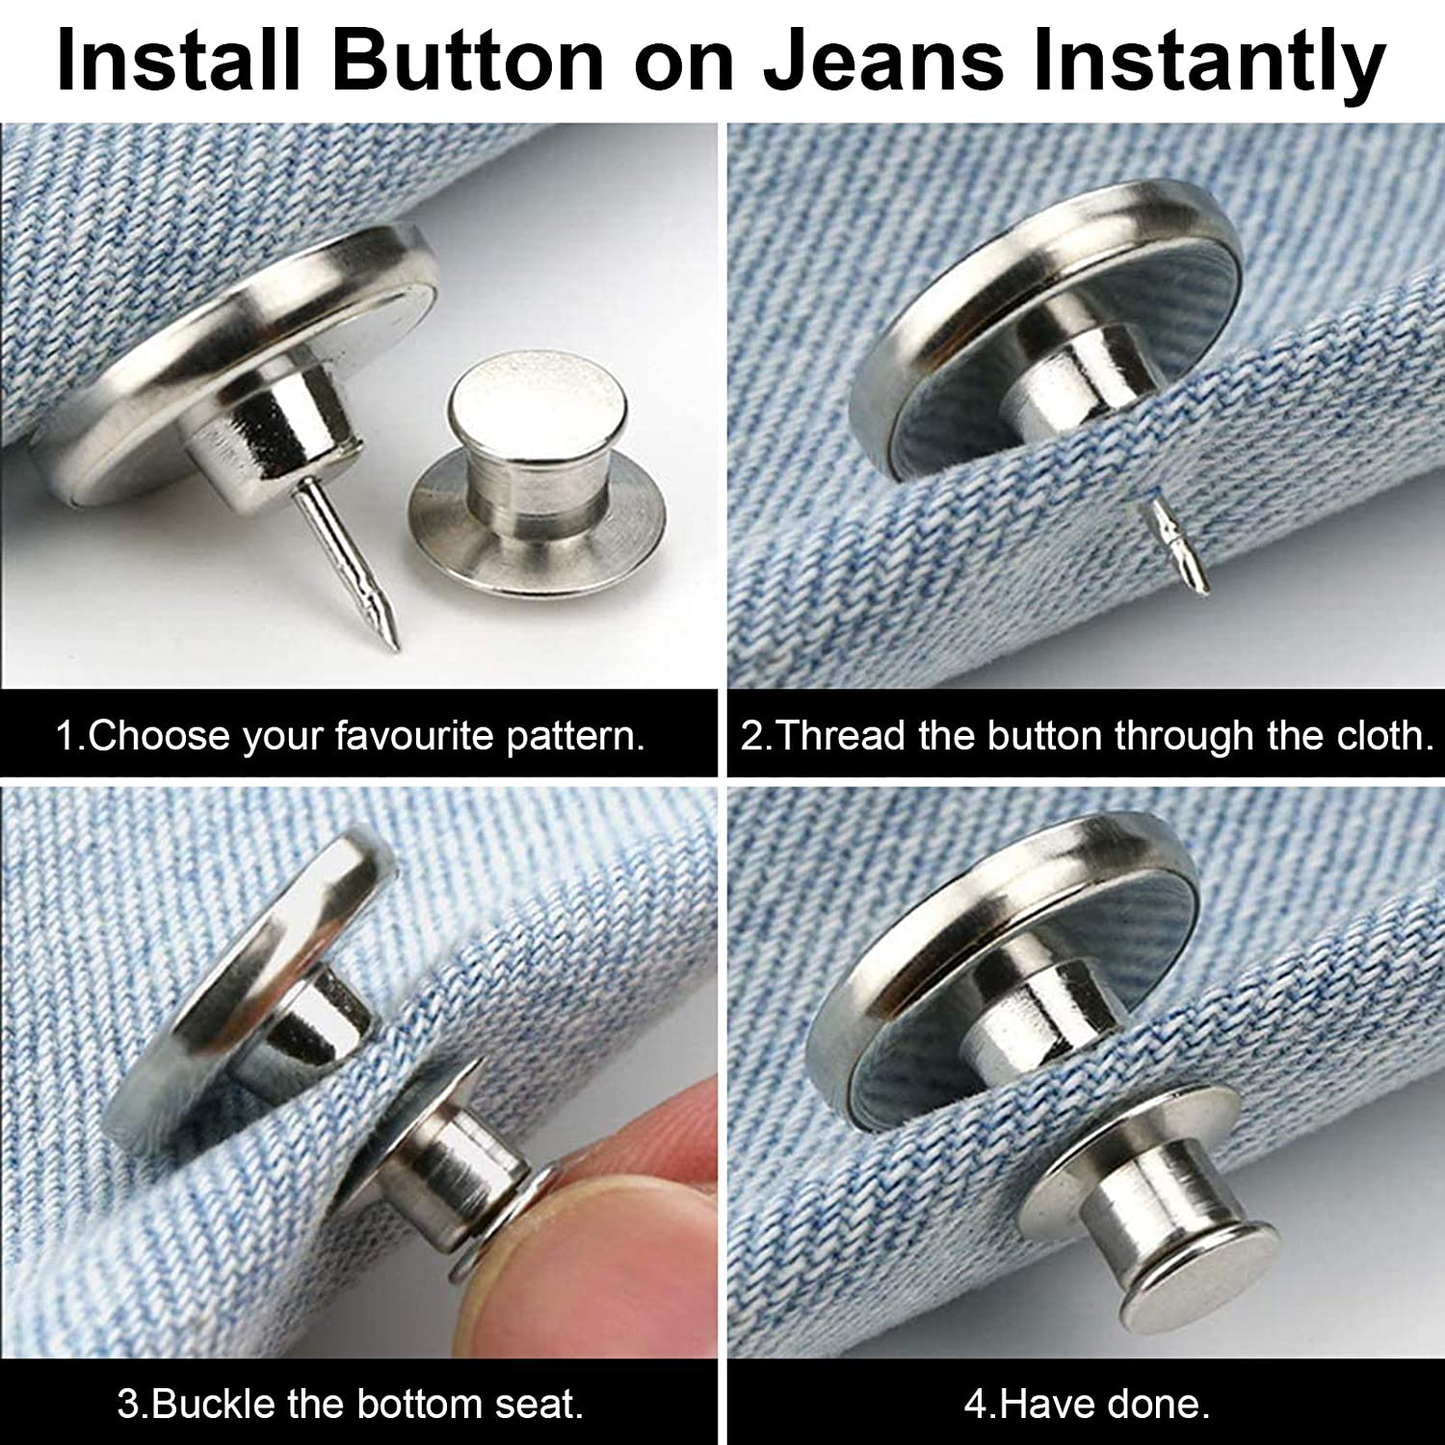 [Upgraded] 8 Sets Button Pins for Jeans, TOOVREN Perfect Fit Jean Button Replacement, 4 Styles Adjustable Jean Button Pins Metal Clips Snap Tack, No Sew Instant Extend or Reduce Any Pants Waist